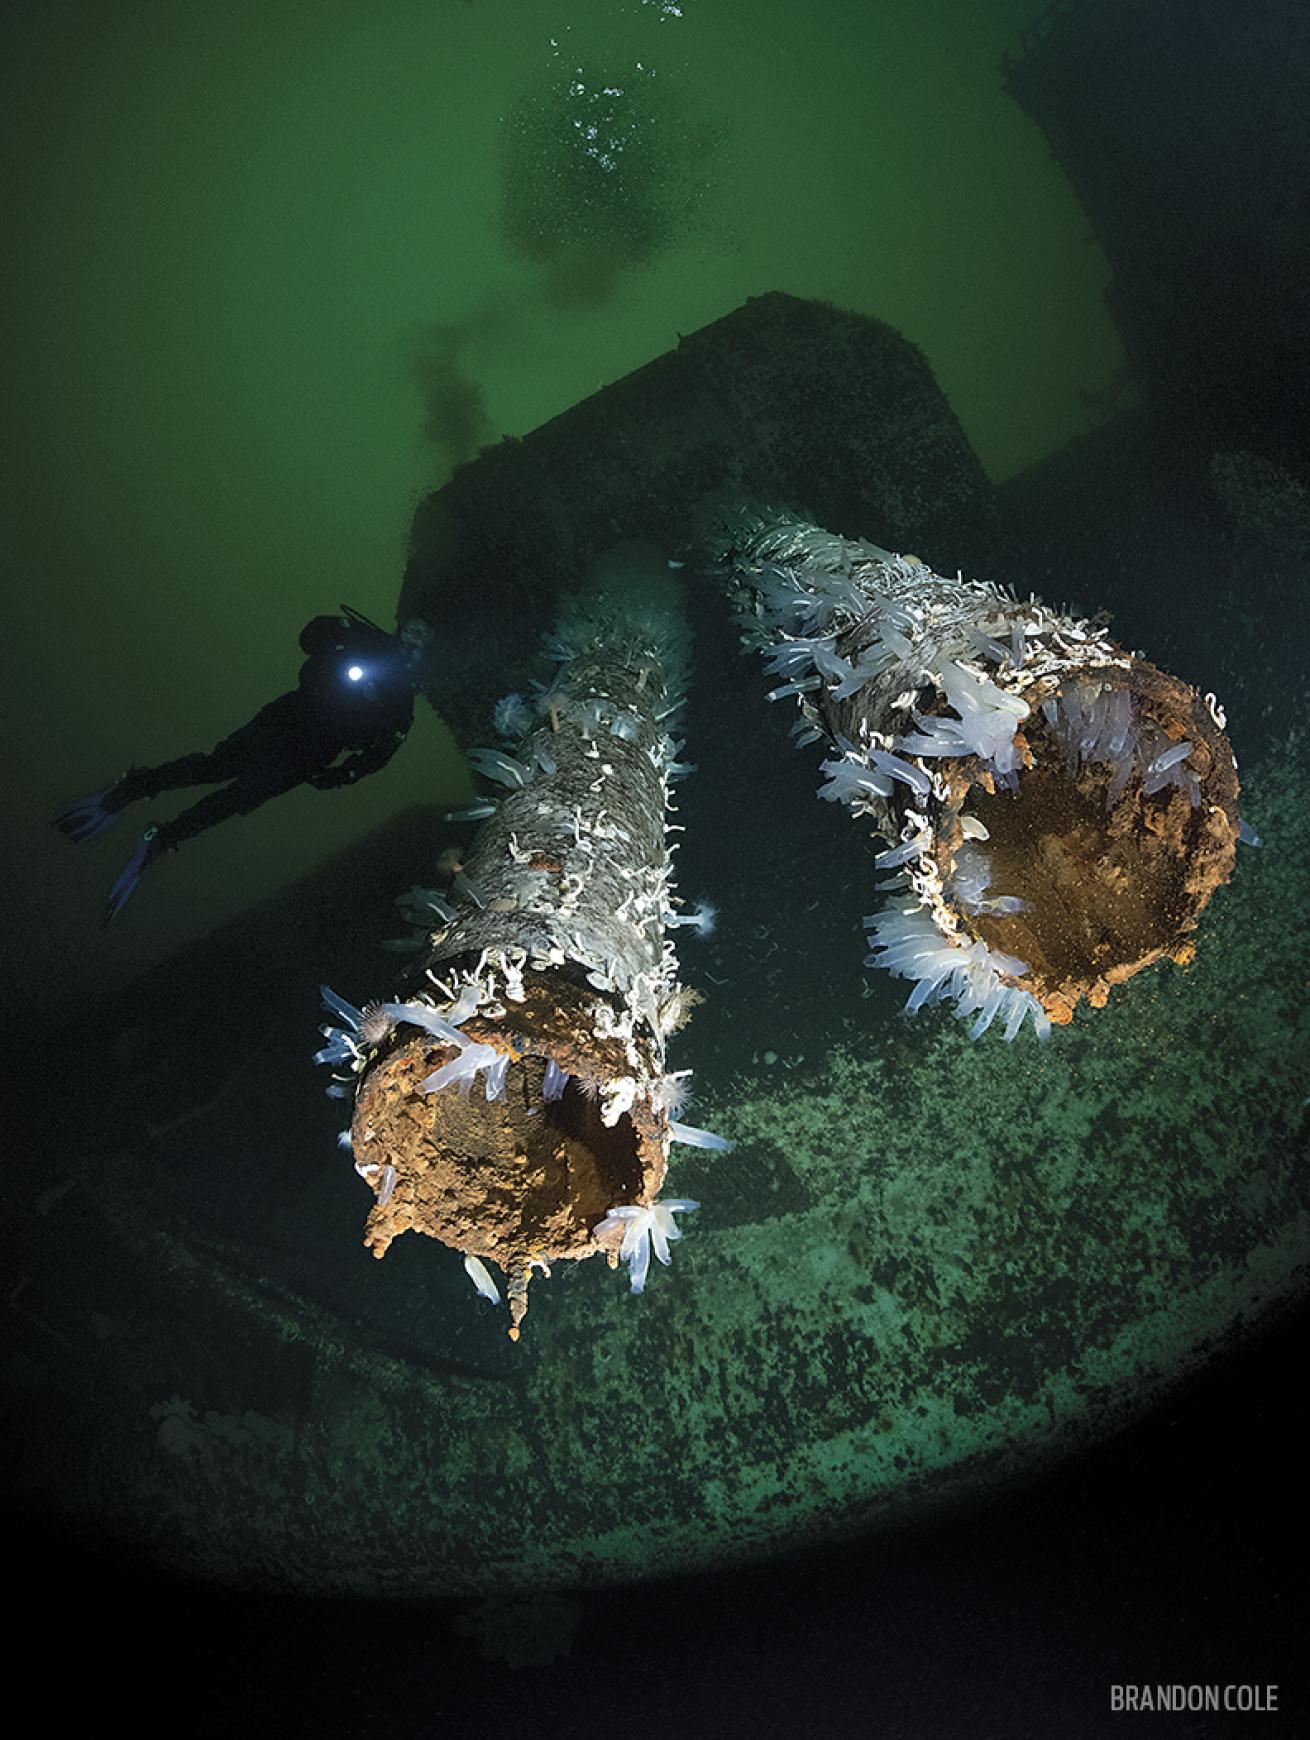 Divers with the Chaudiere wreck in British Columbia